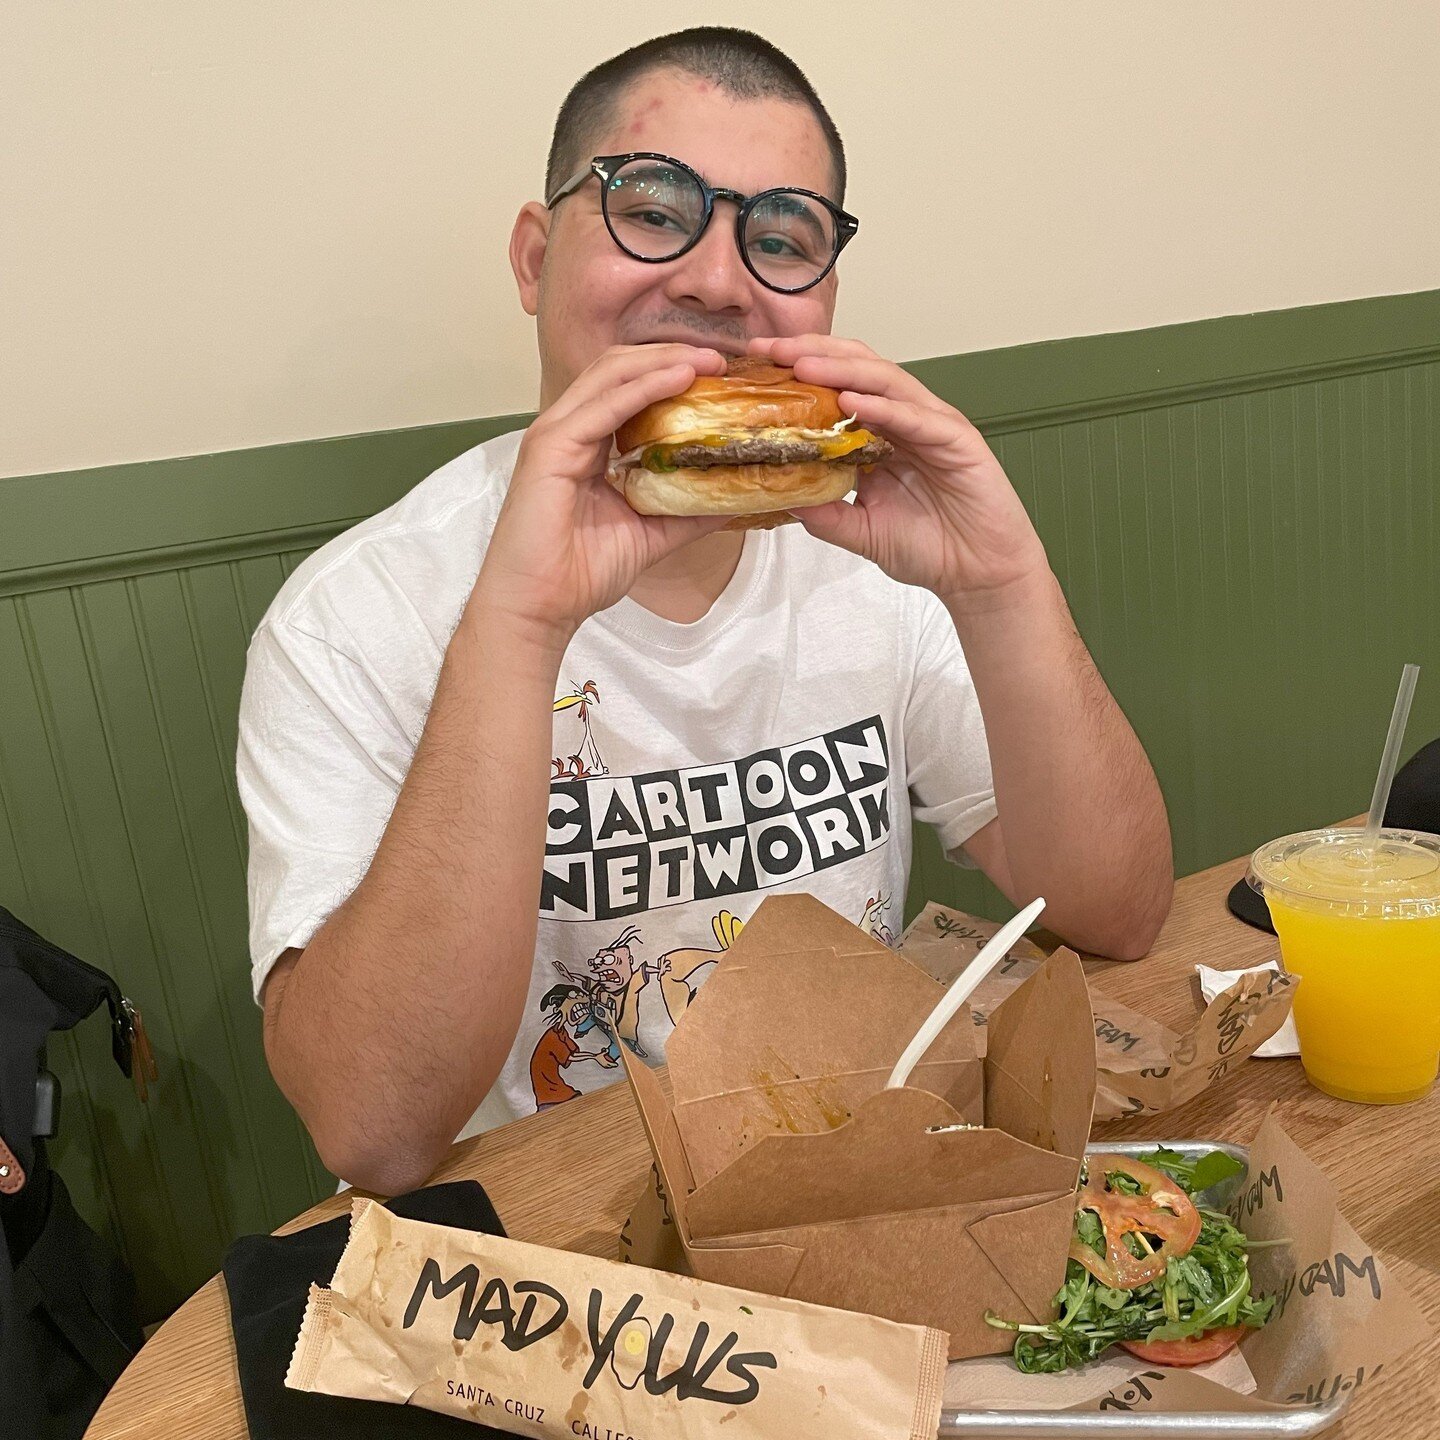 We had a great time with Vincent today at @mad_yolks in Santa Cruz! The entire meal was a huge hit - especially the potato bites we brought back to share at the office!
#community #inclusion #eatlocal #thanks #santacruz